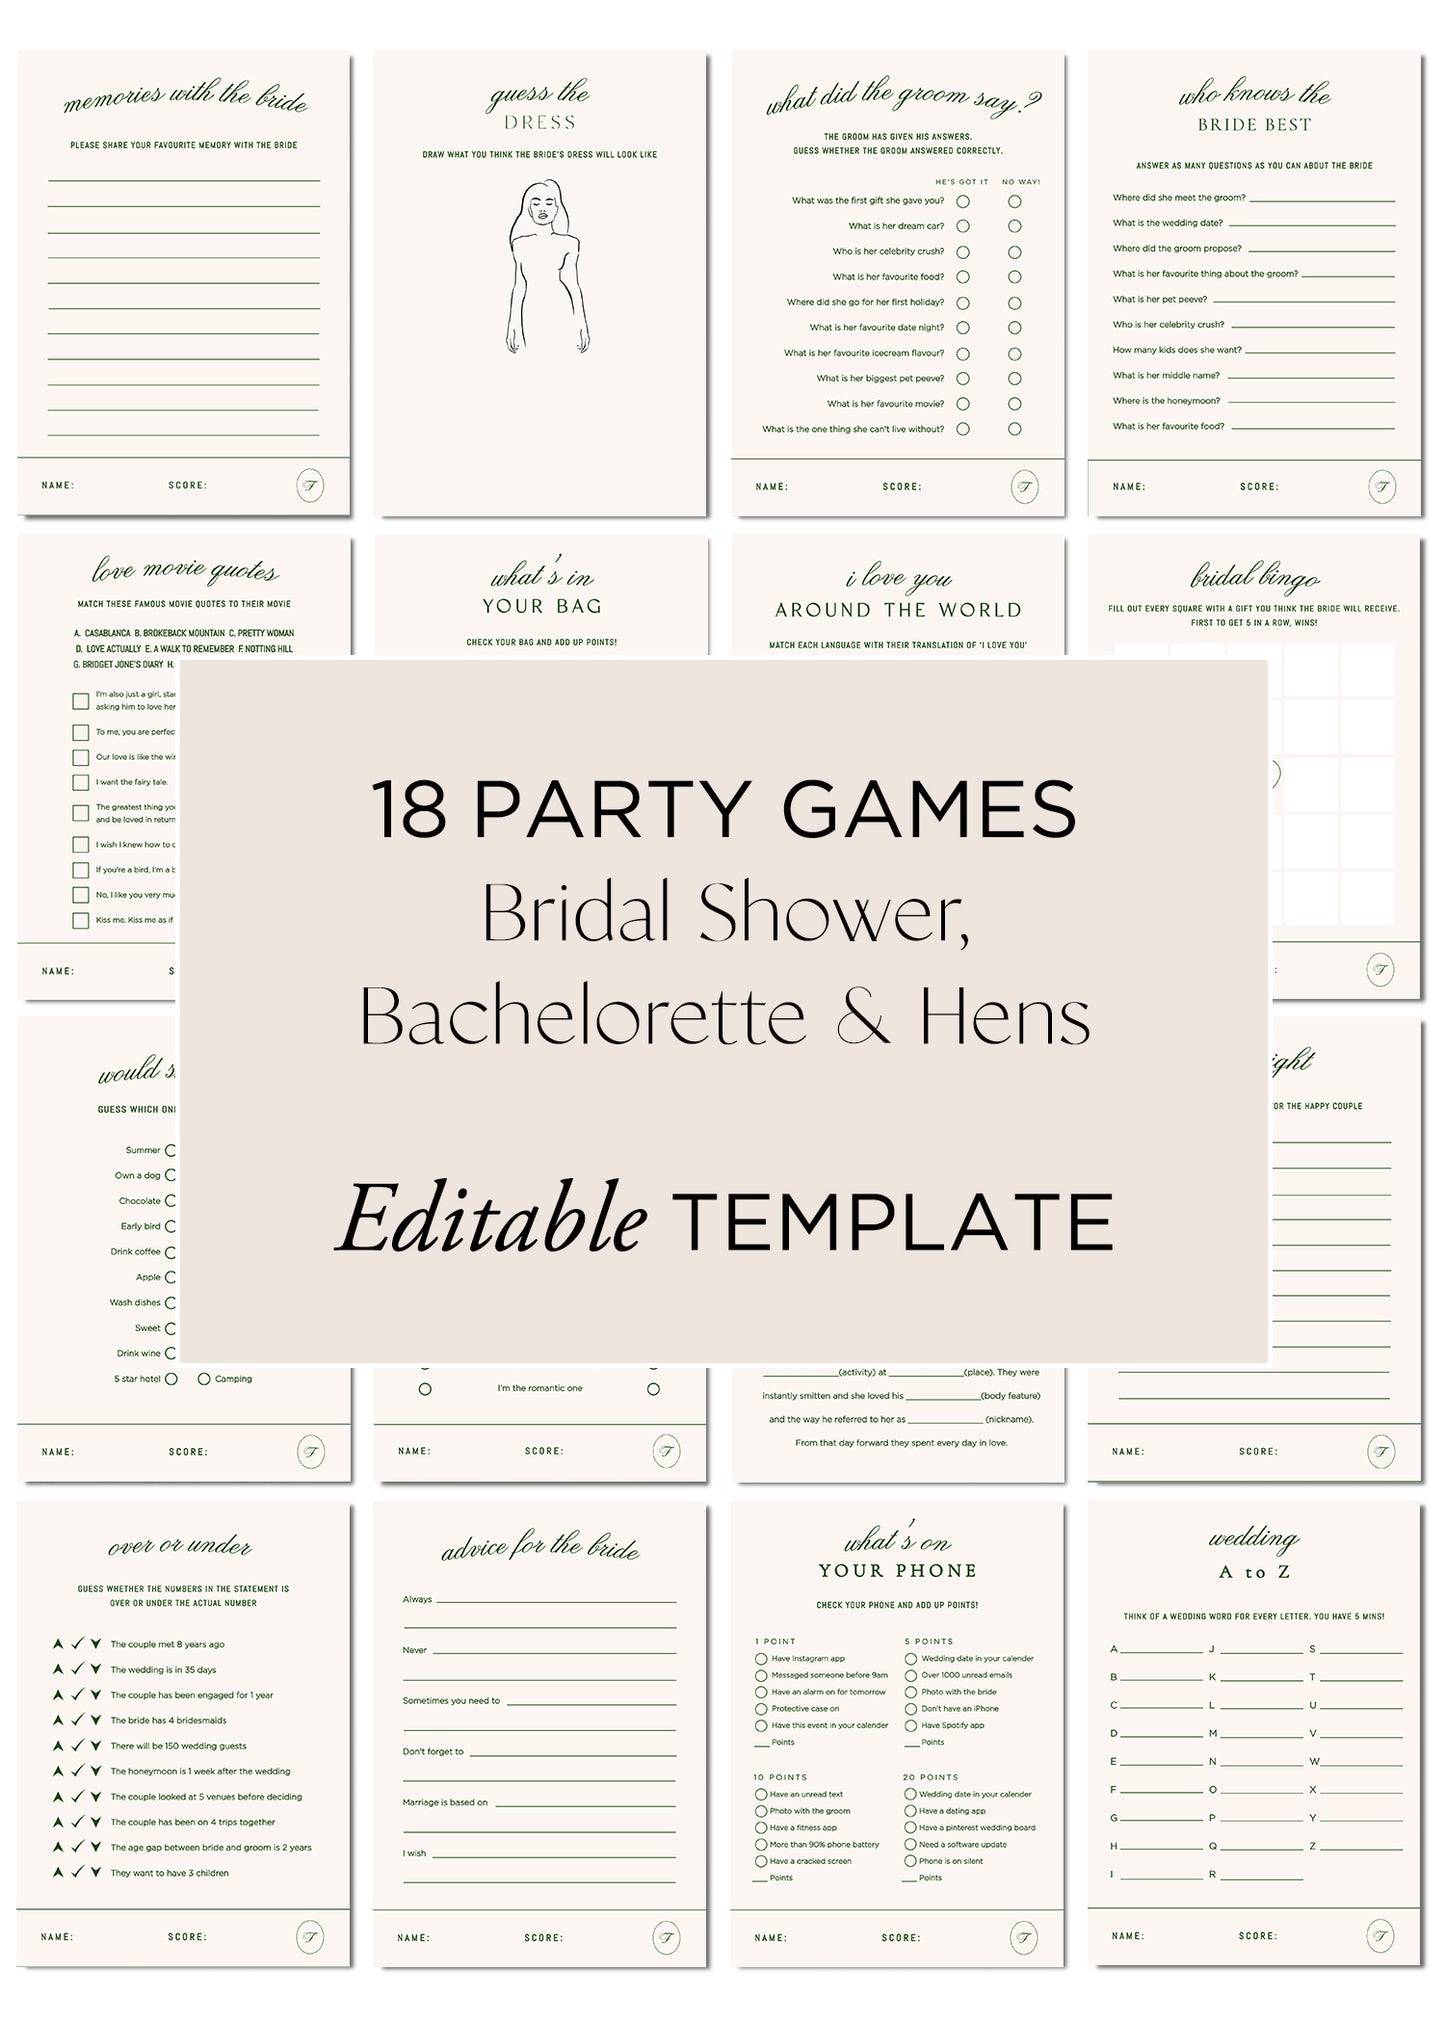 Hens Bachelorette Party Games Editable Template - Brasserie - Vorfreude Stationery